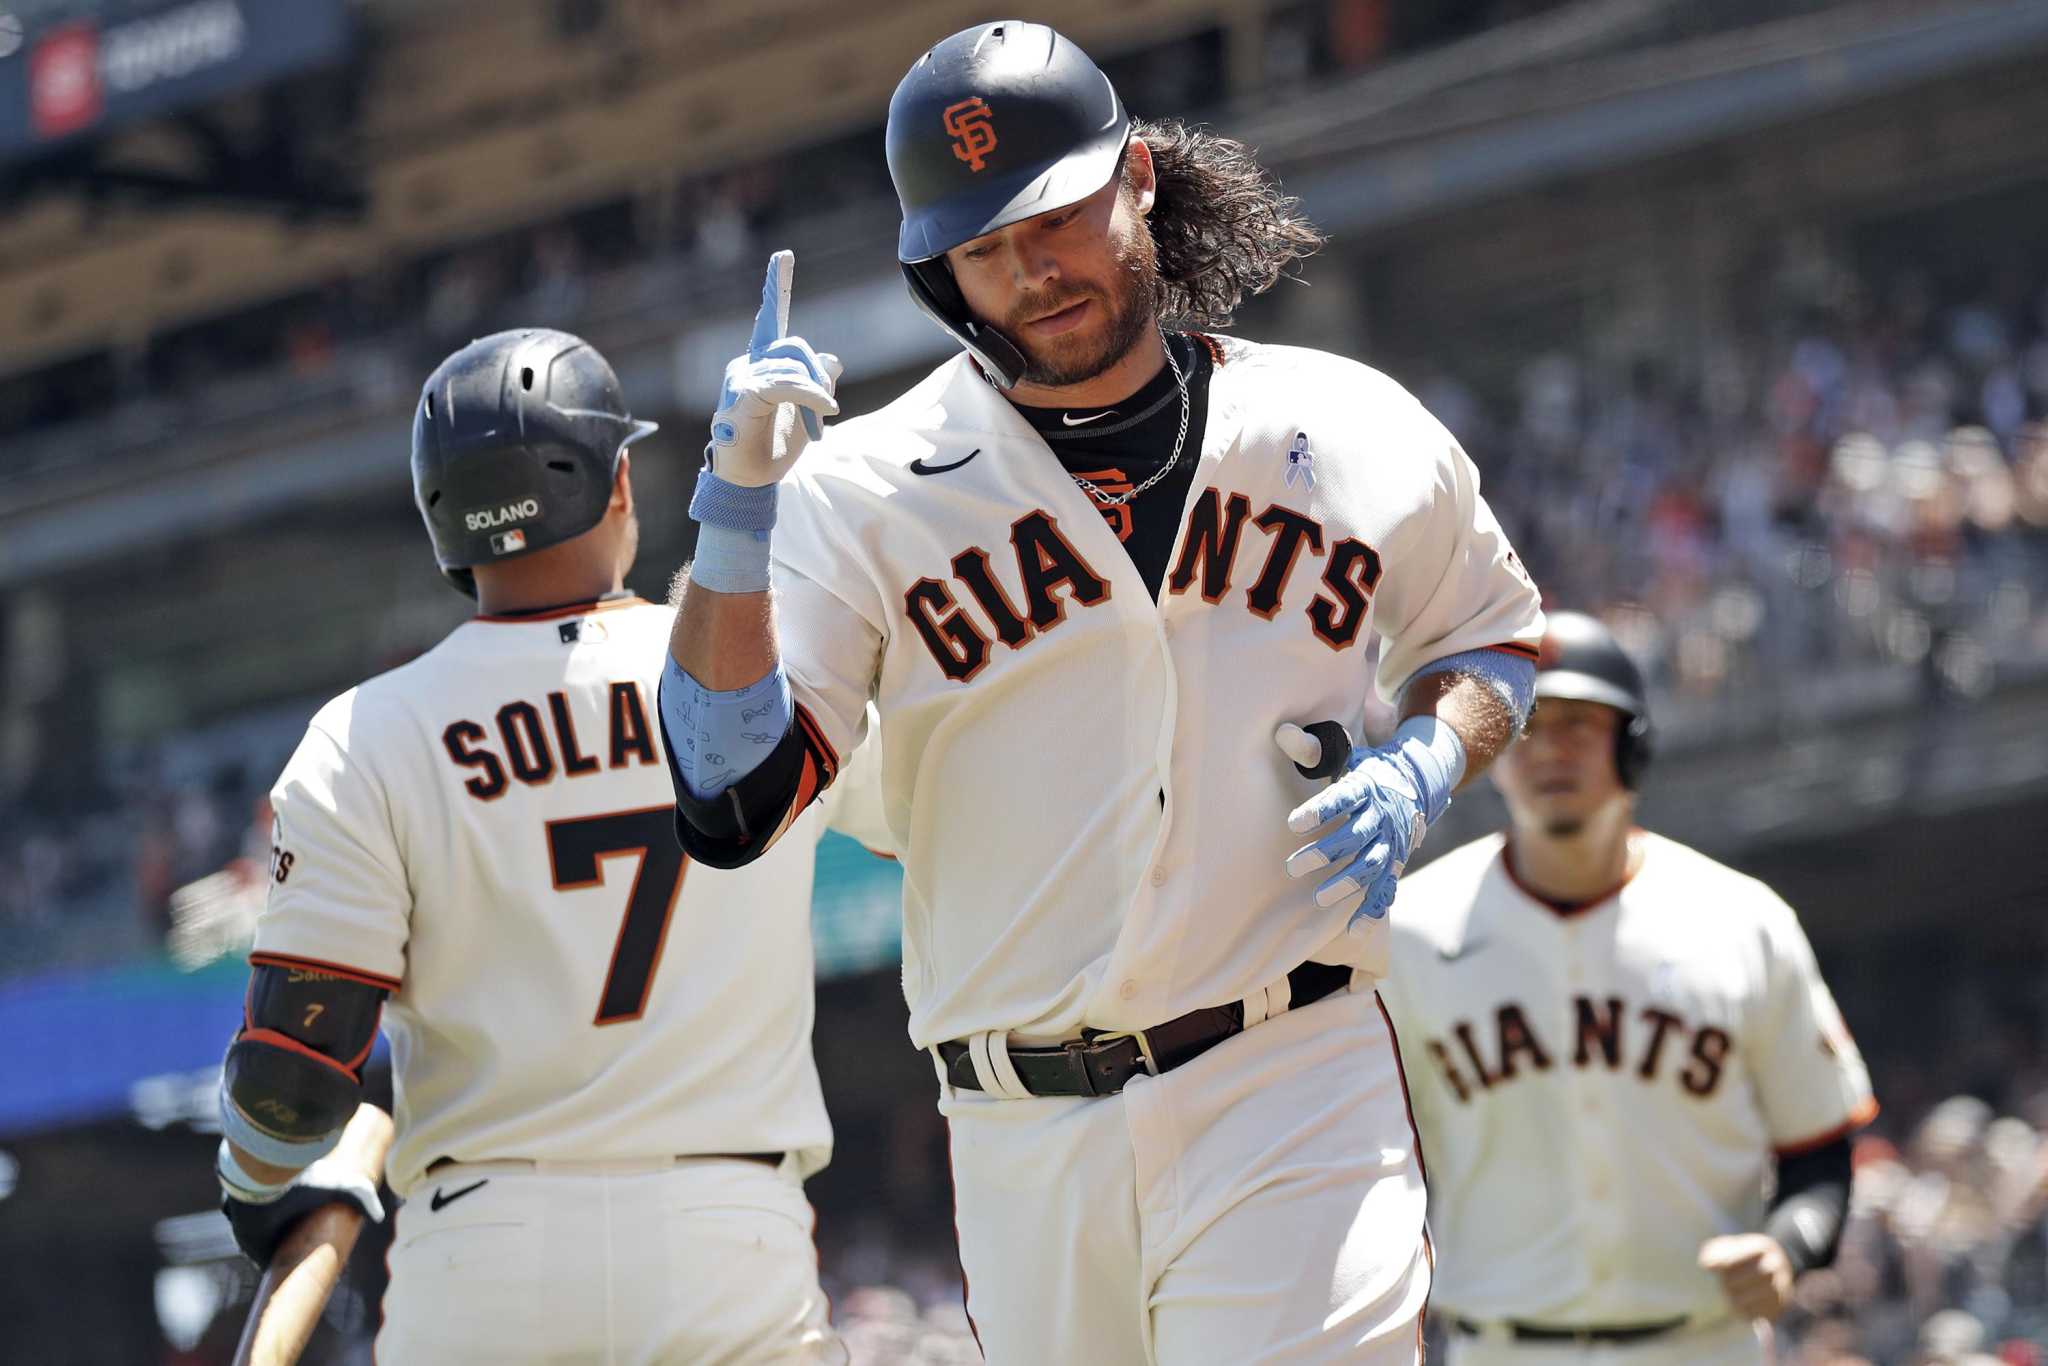 Brandon Crawford deserves to be real 2021 NL MVP candidate – NBC Sports Bay  Area & California